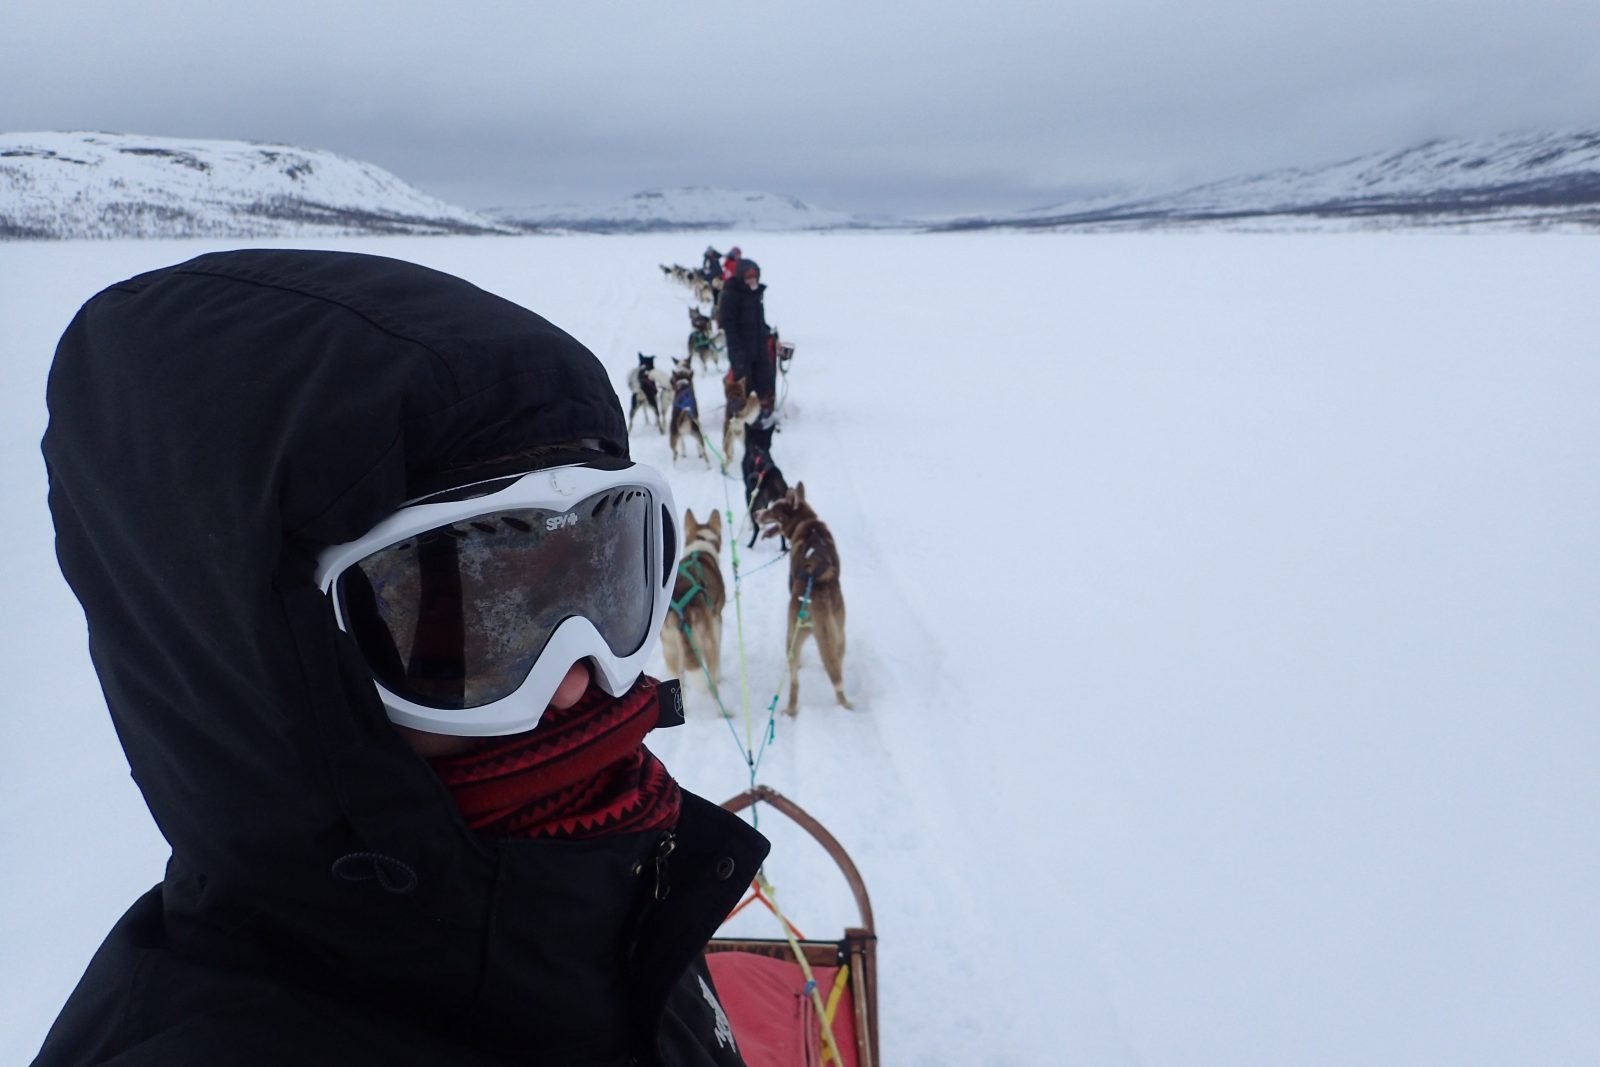 A selfie taken in the Arctic, by someone wearing ski goggles and a hood - there are sled dogs in the background.